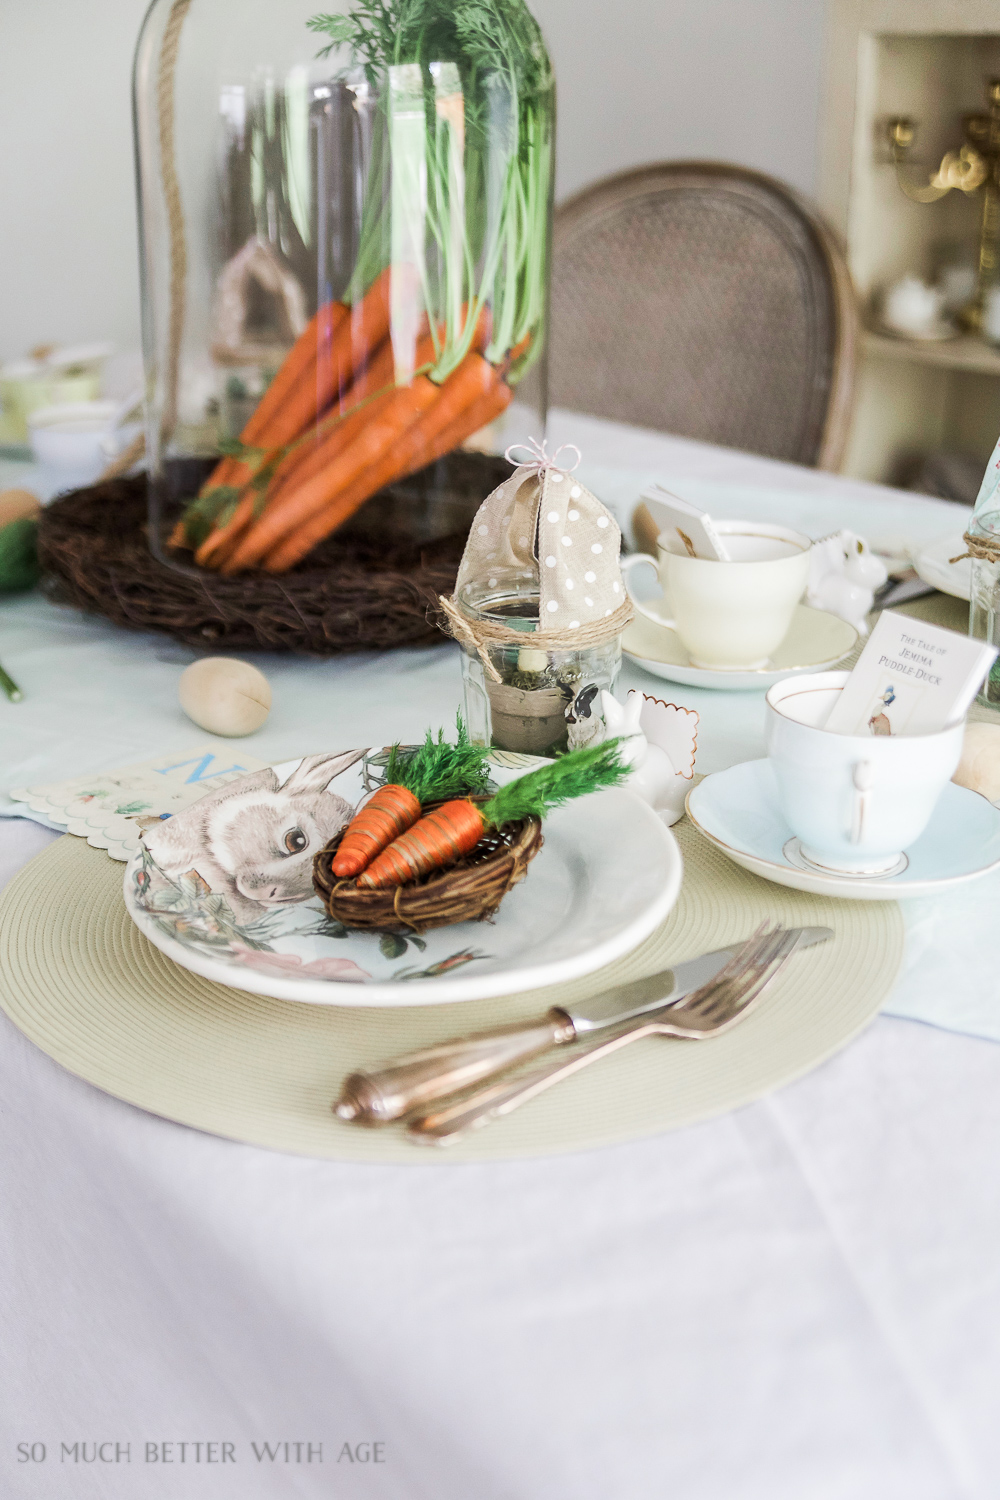 How to Set a Peter Rabbit Inspired Easter Table/carrot centrepiece - So Much Better With Age